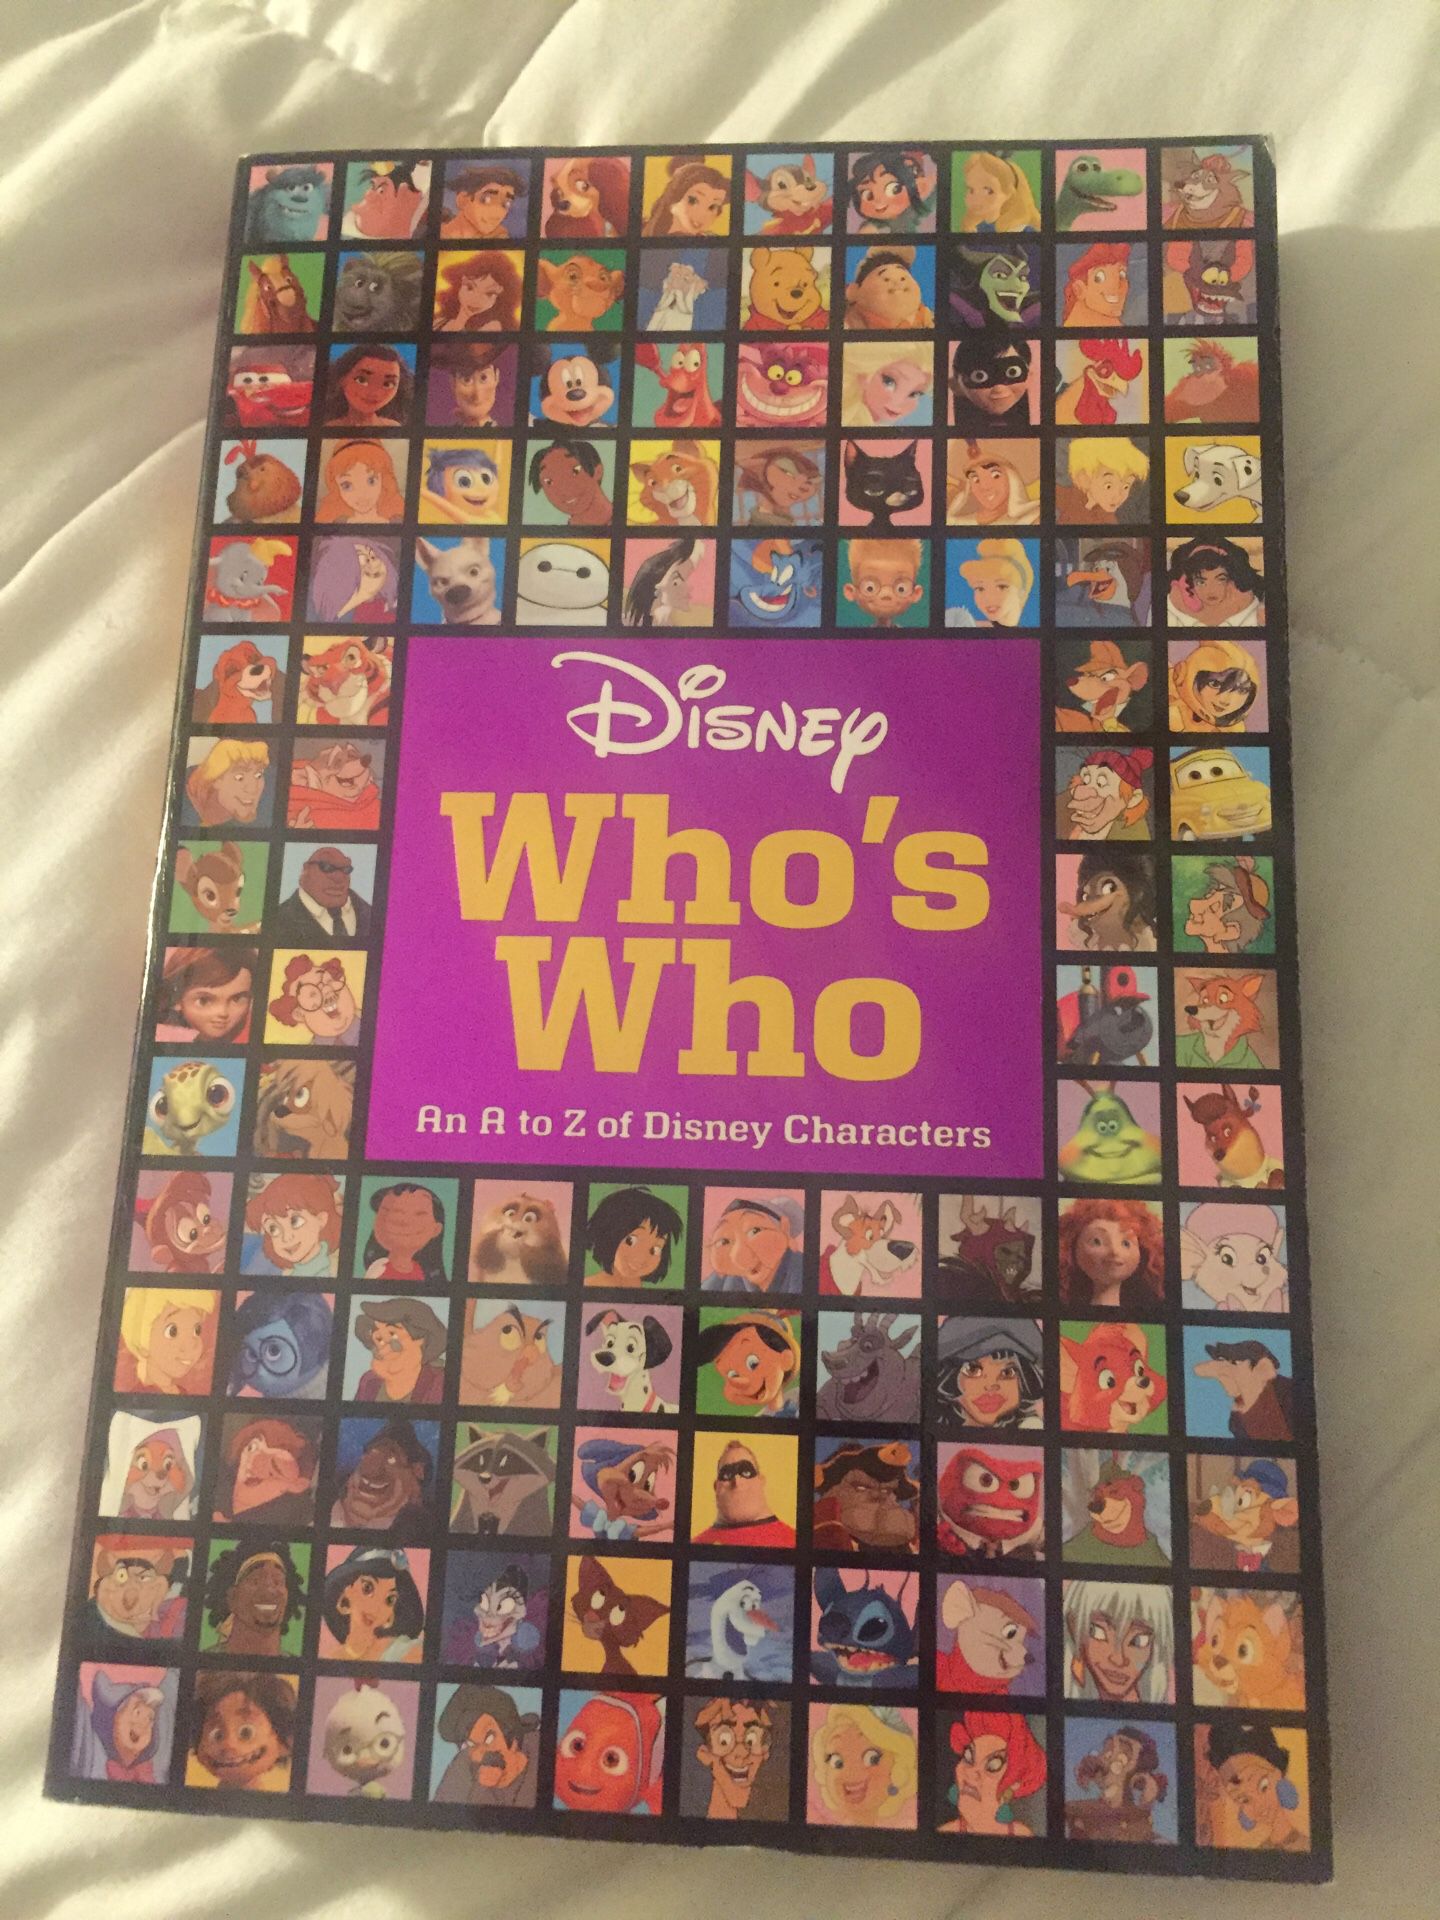 A Disney character dictionary book